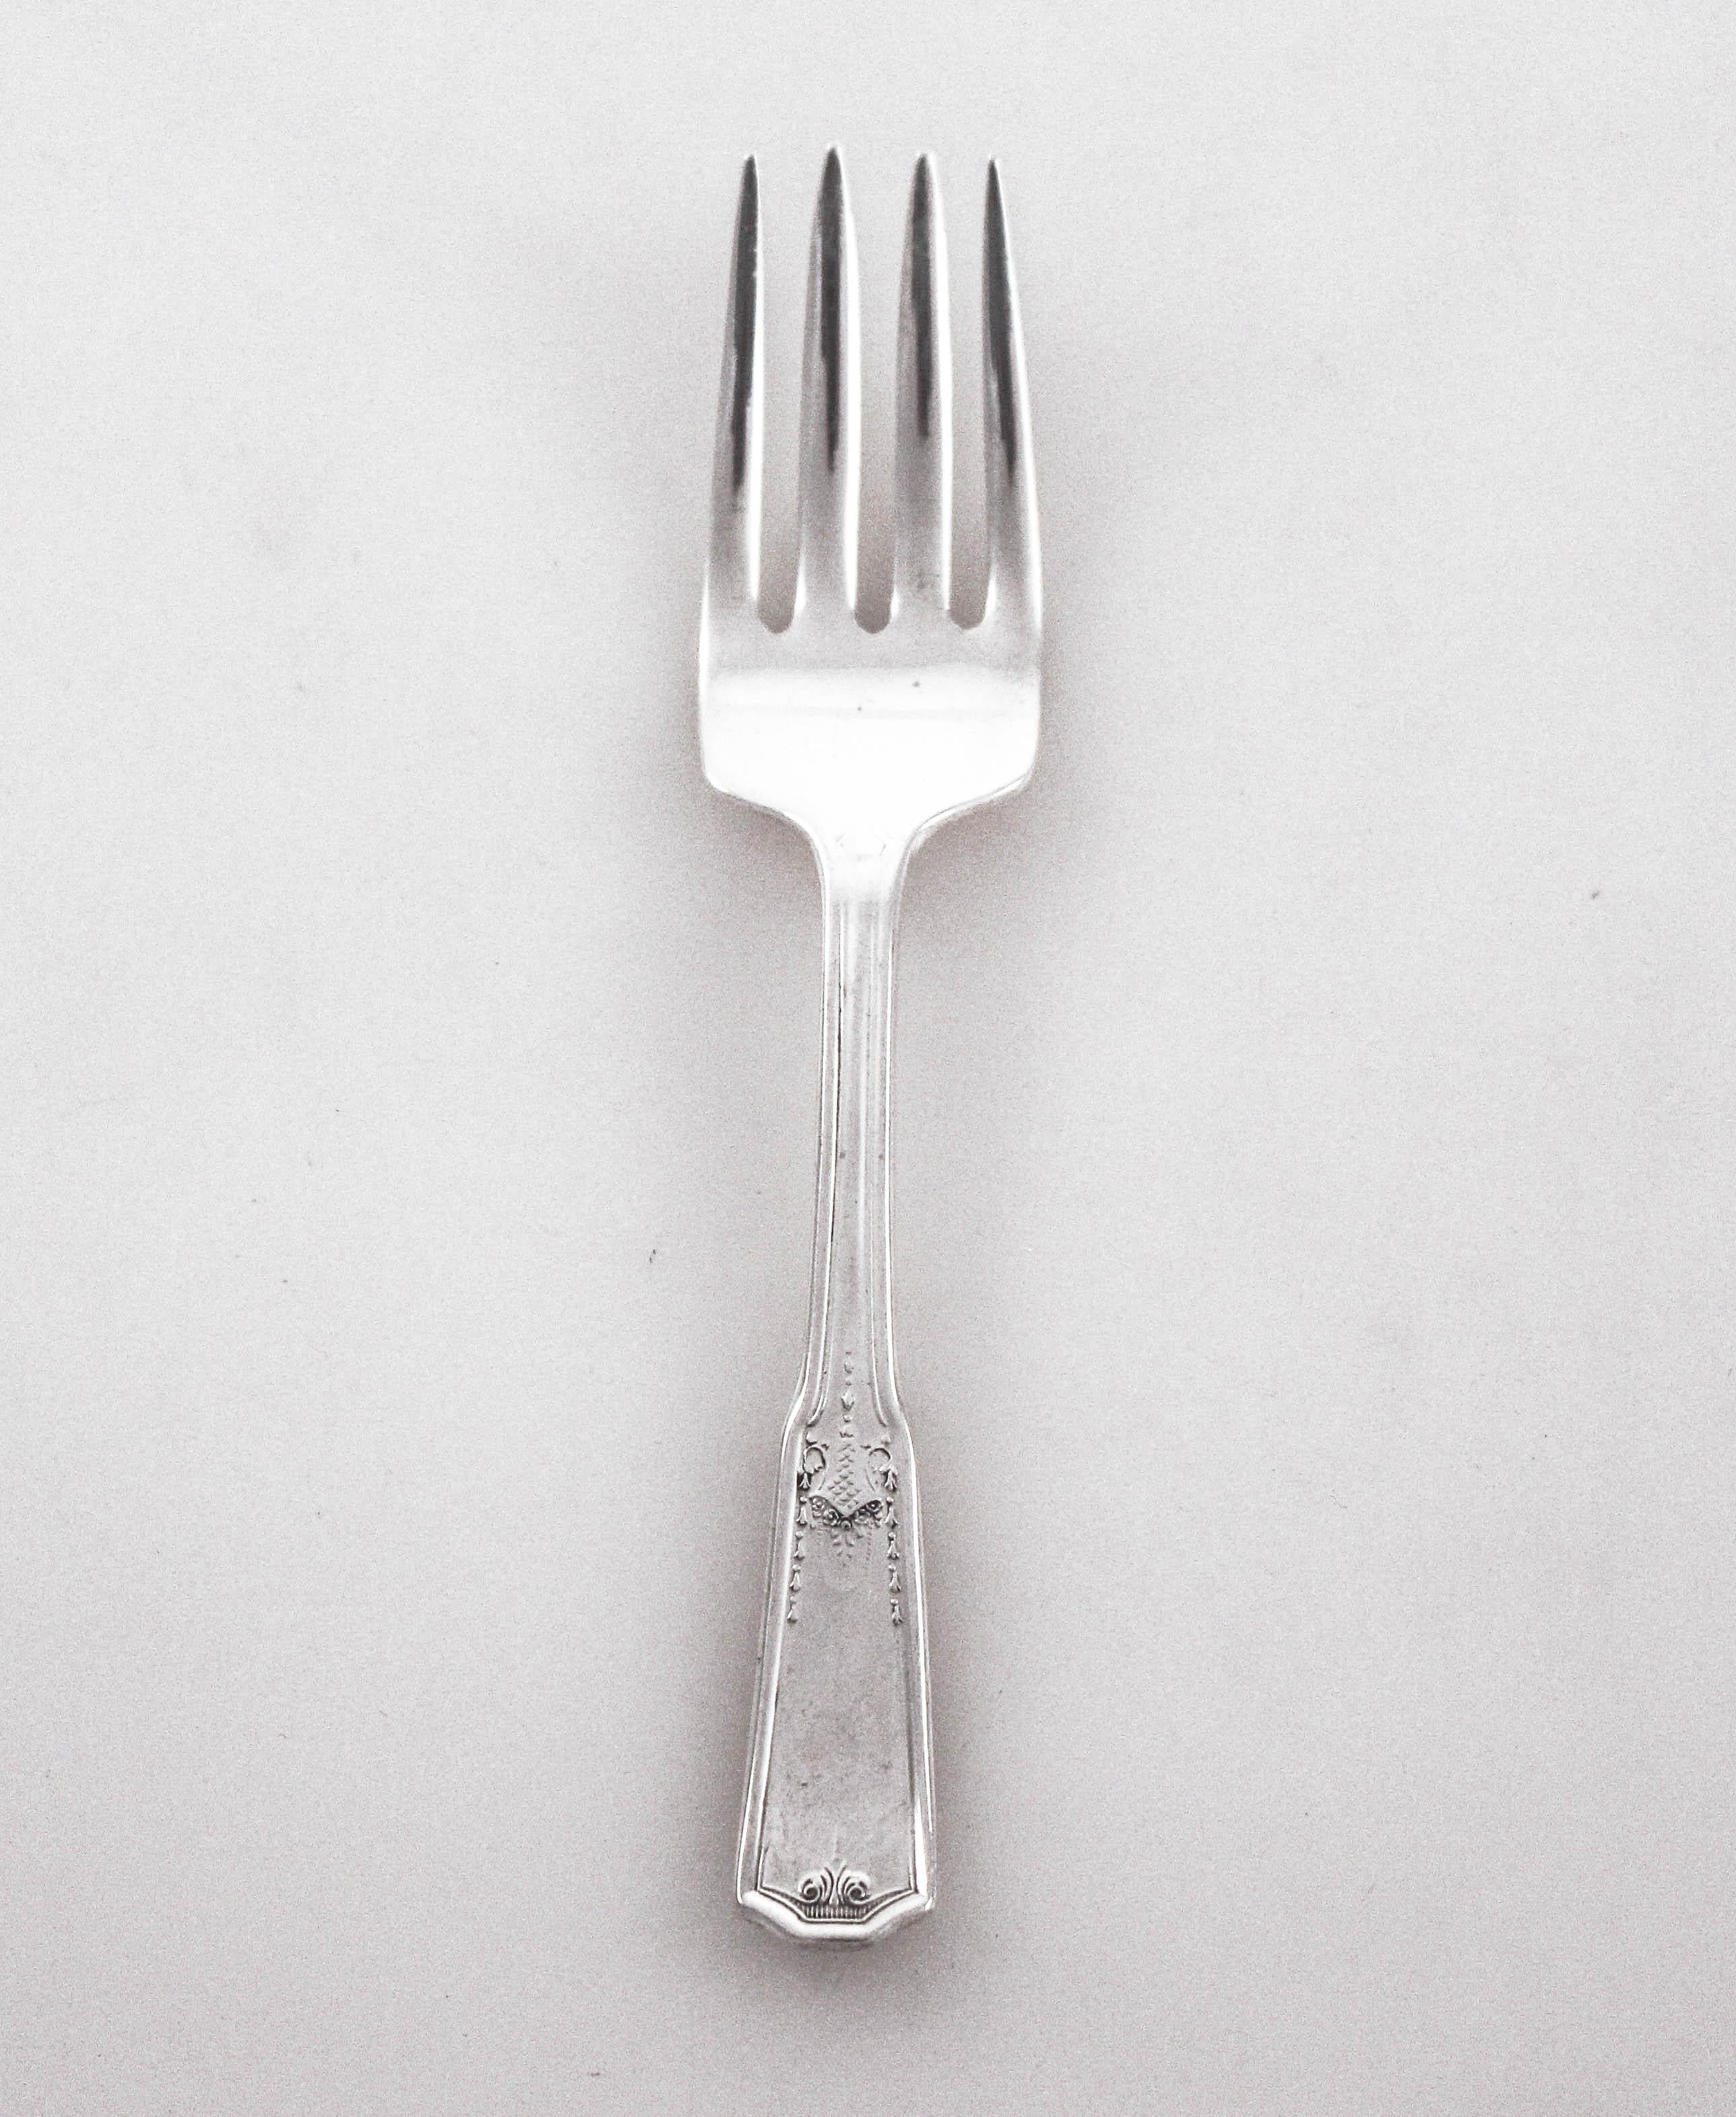 We are happy to offer this sterling silver baby fork and spoon set by International Silver. A simple and elegant baby fork and spoon set that is unisex. Give the new born baby something they will have long after they’ve outgrown the baby clothing